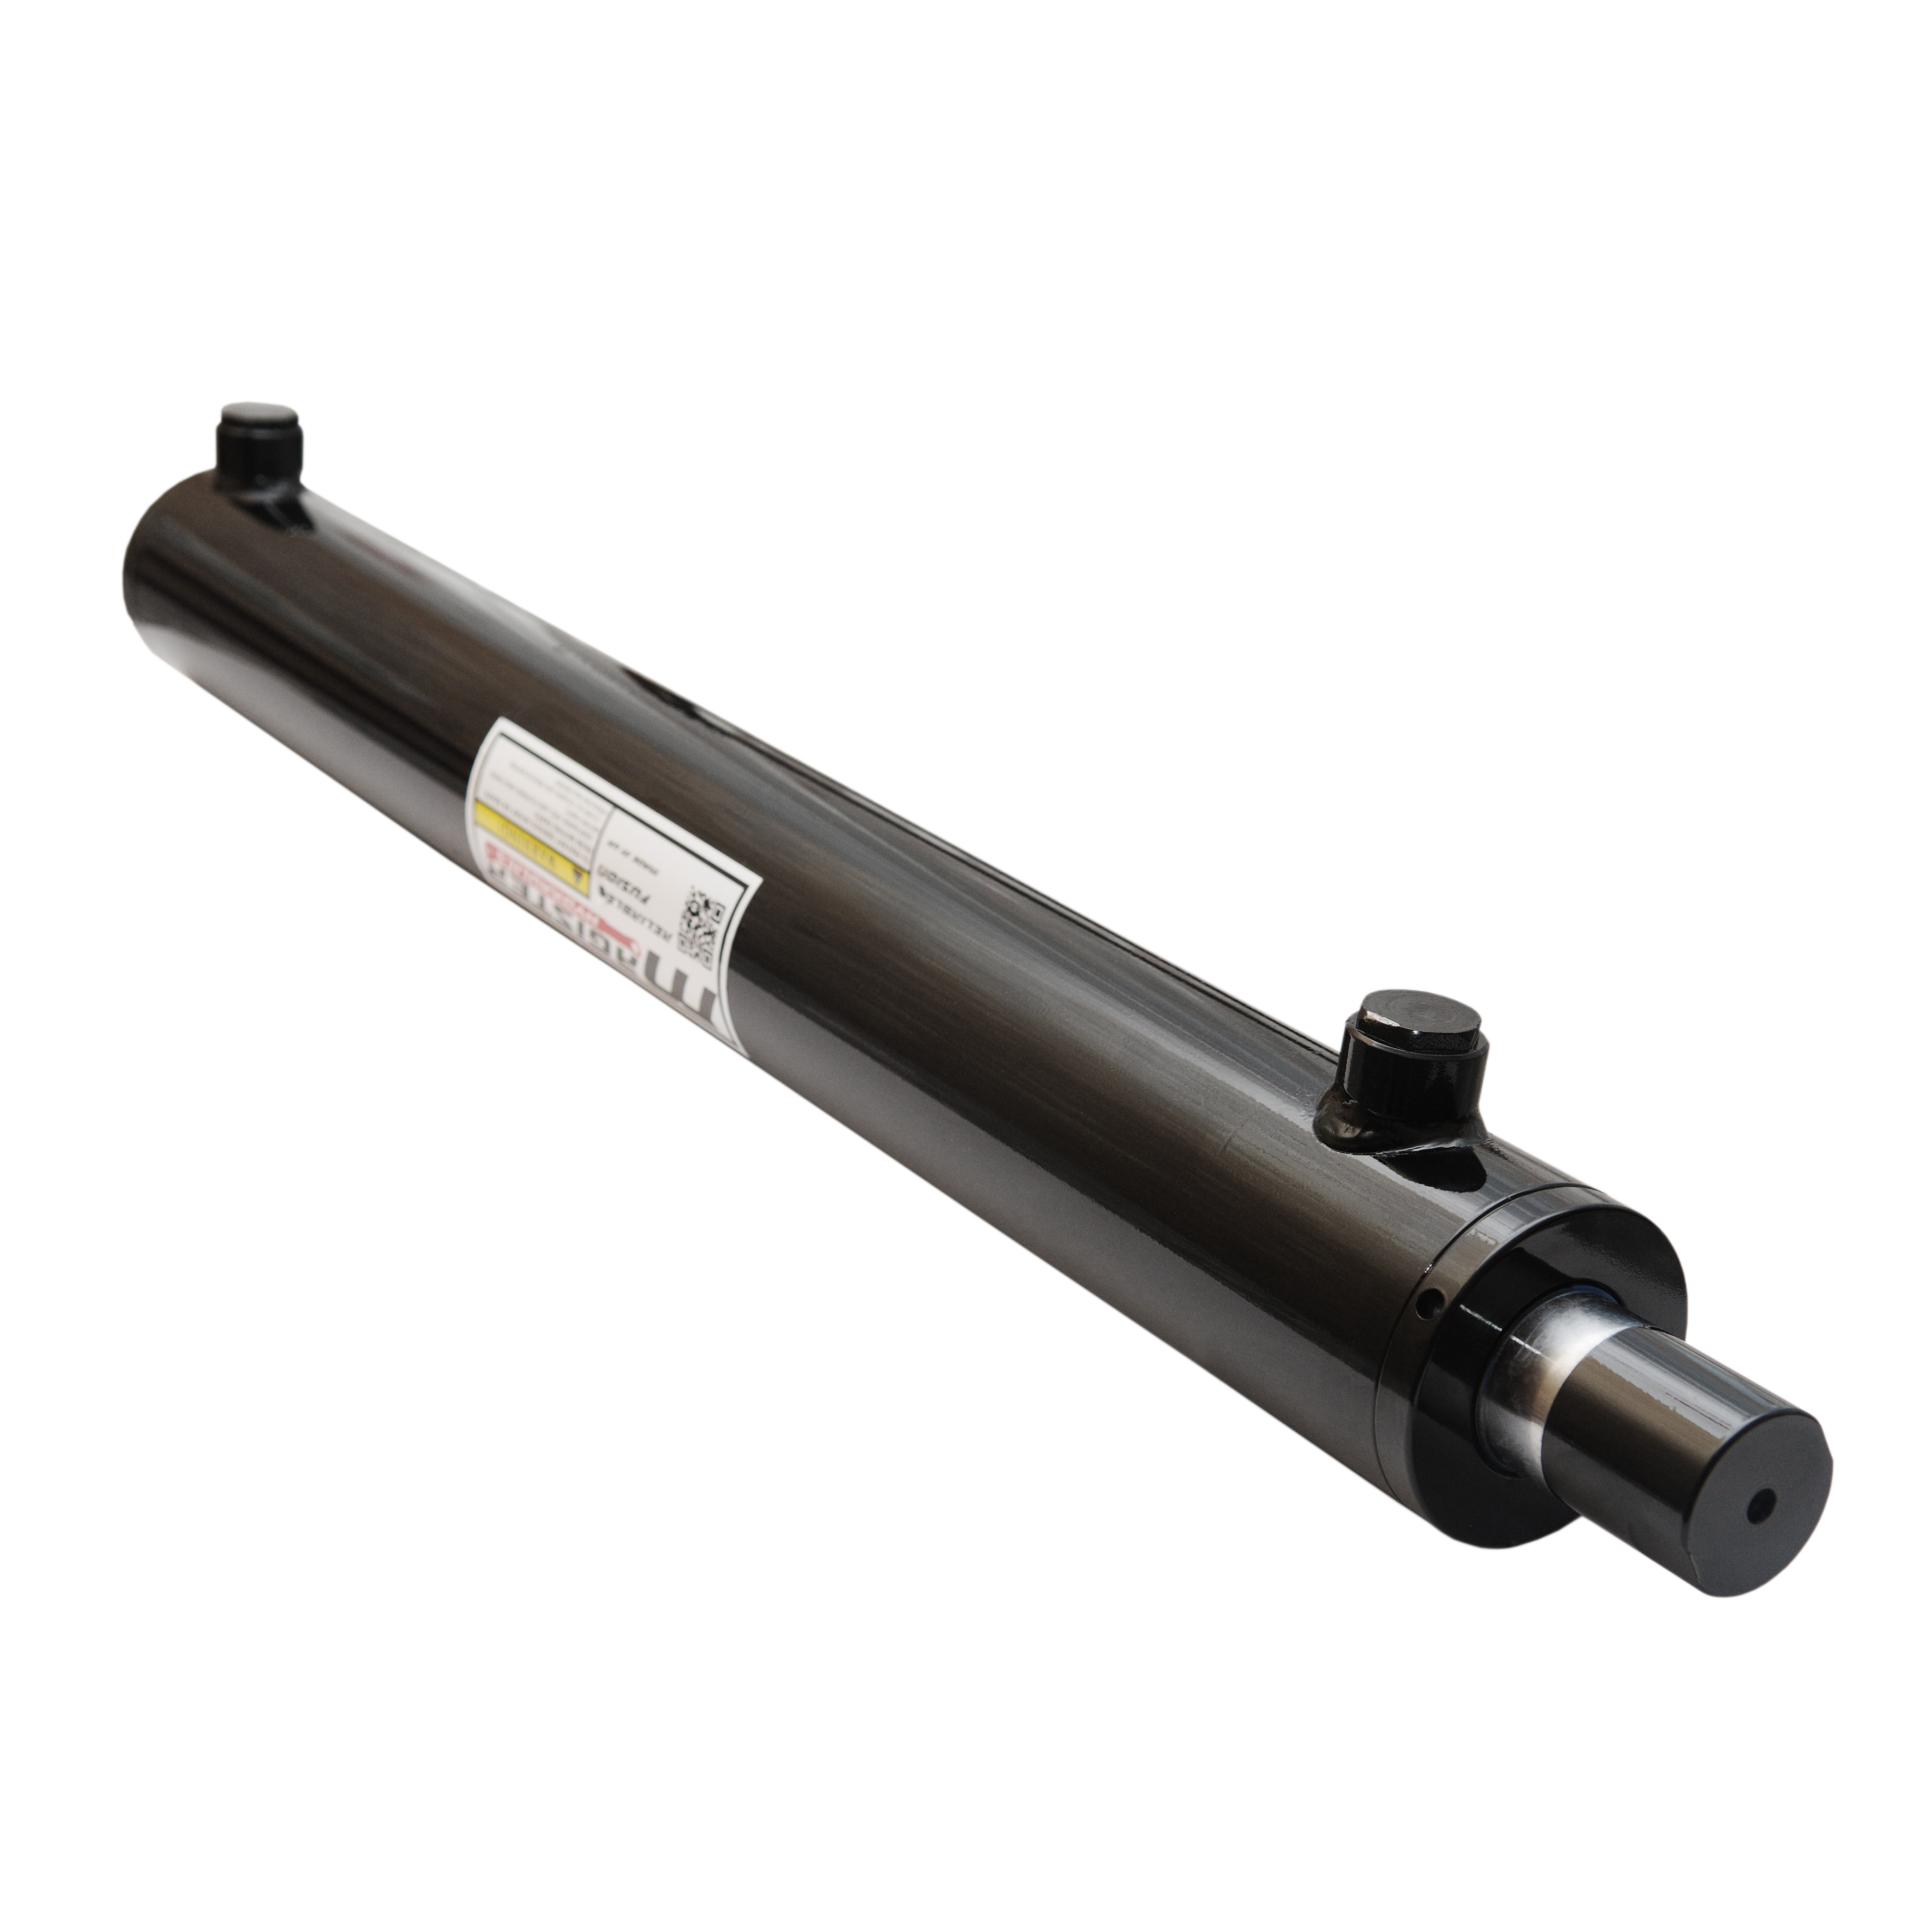 2.5 bore x 23 stroke hydraulic cylinder, welded universal double acting cylinder | Magister Hydraulics